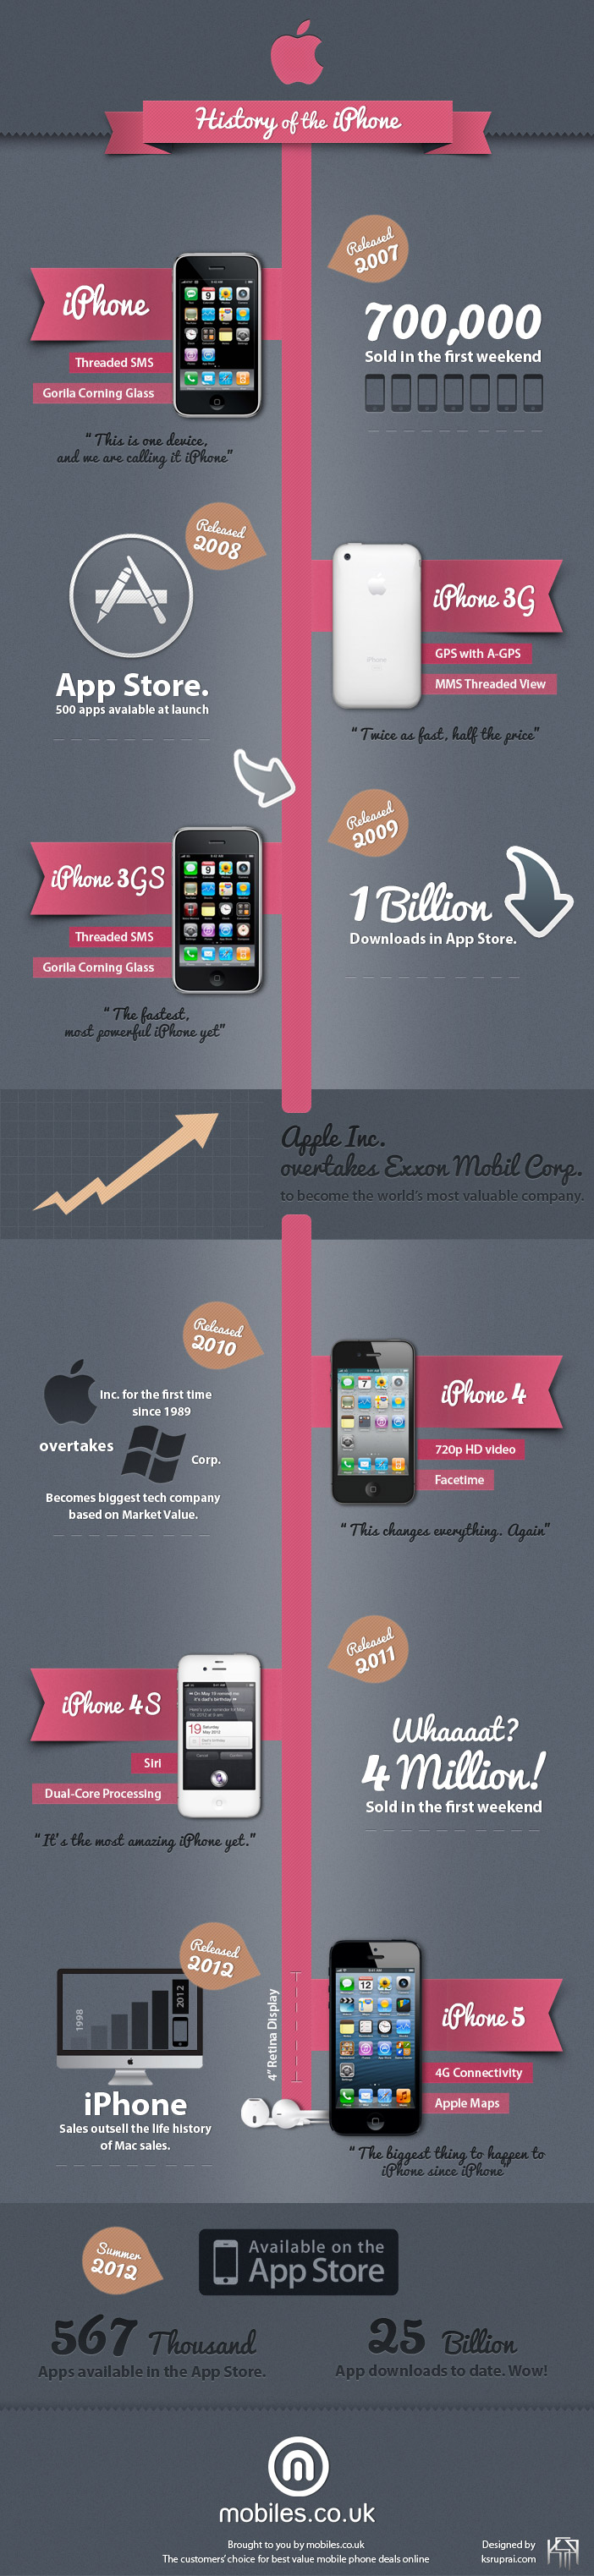 The history of the iPhone [infographic] | Mobile Fun Blog